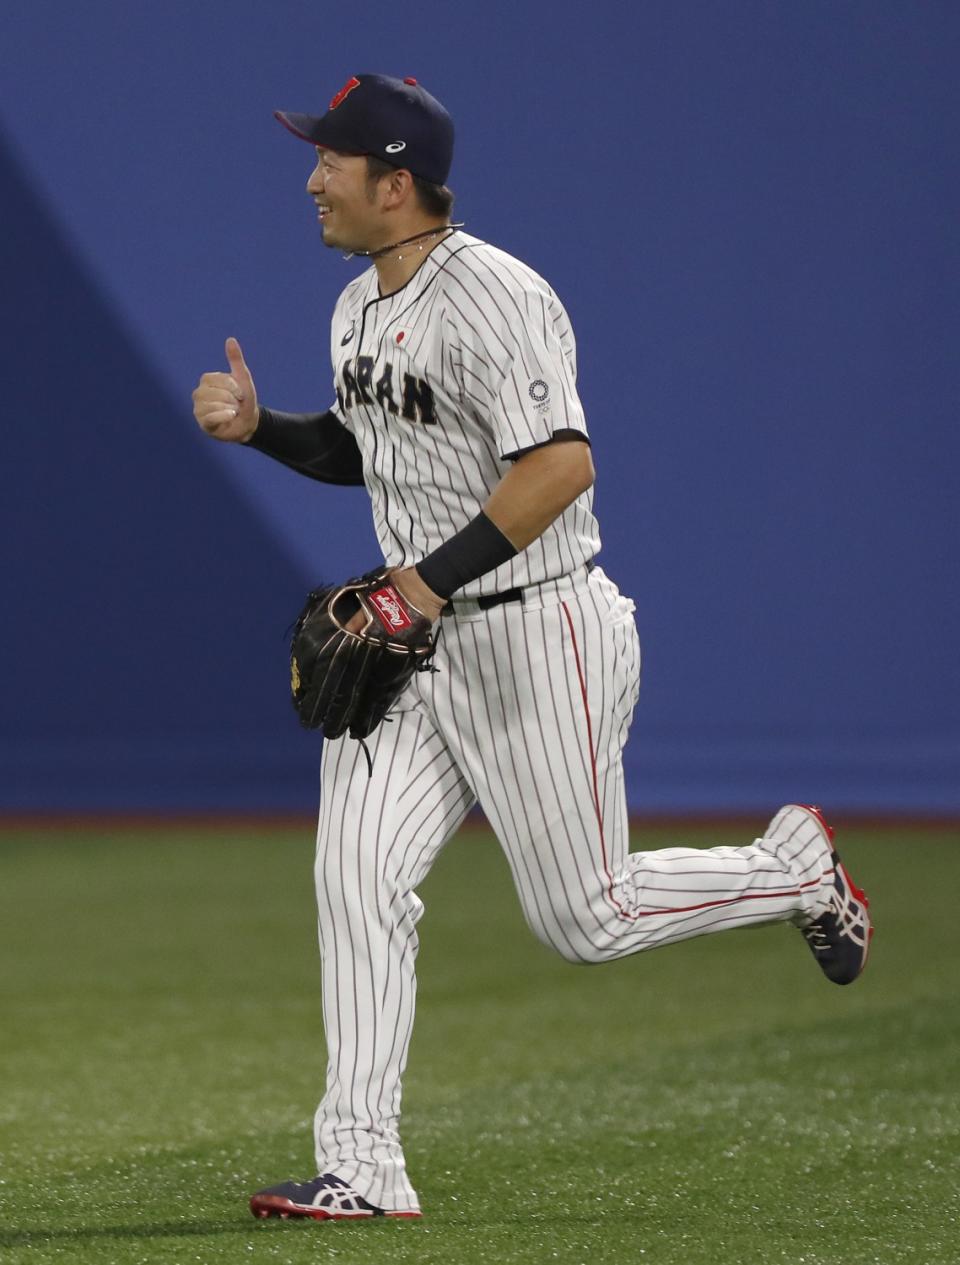 Japan outfielder Seiya Suzuki gives a thumbs up while running on the field